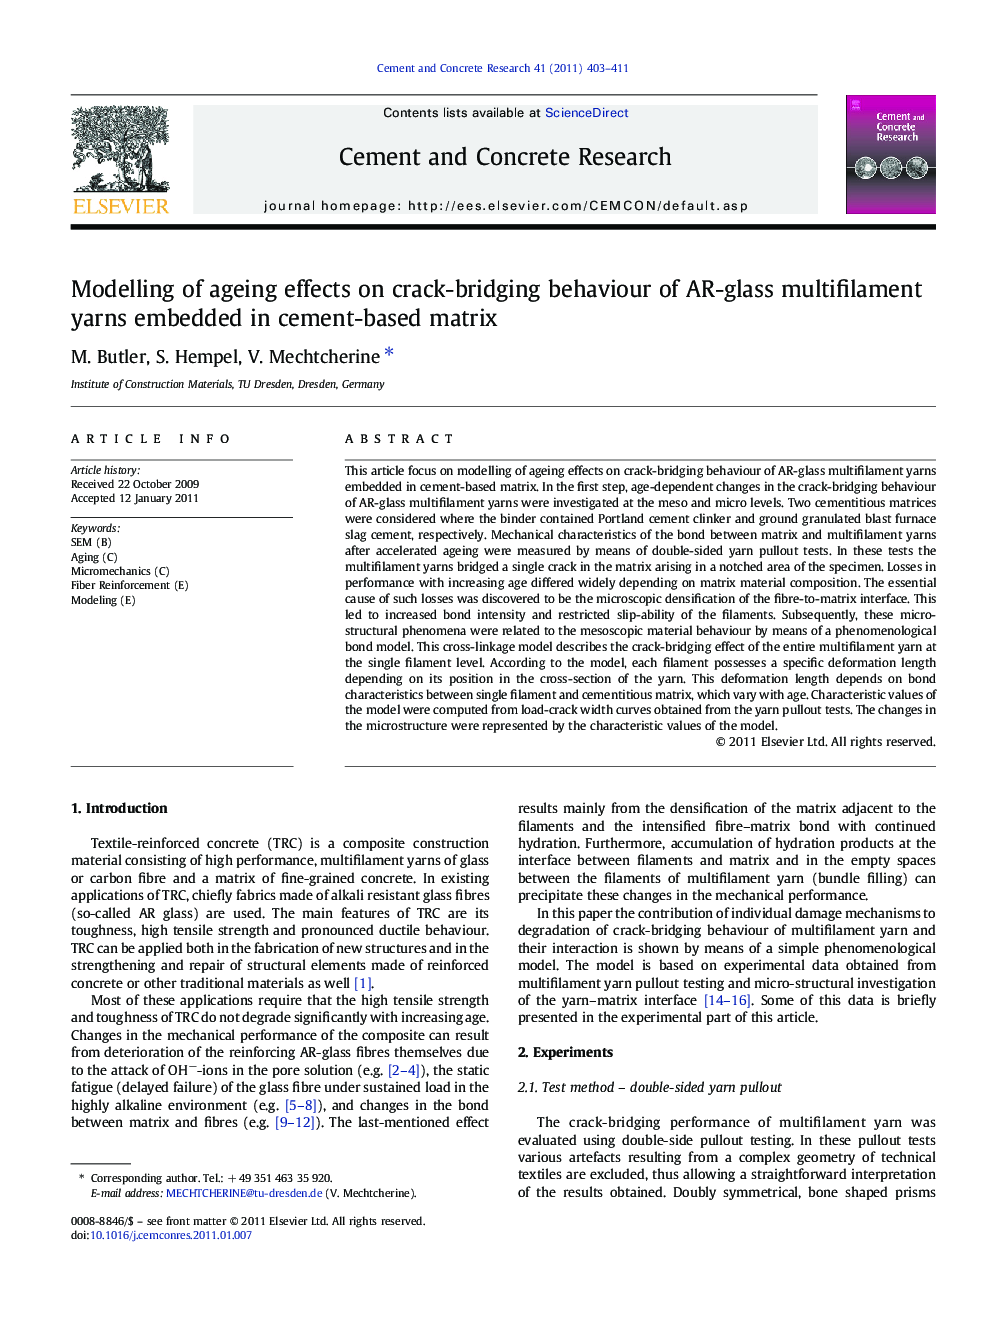 Modelling of ageing effects on crack-bridging behaviour of AR-glass multifilament yarns embedded in cement-based matrix